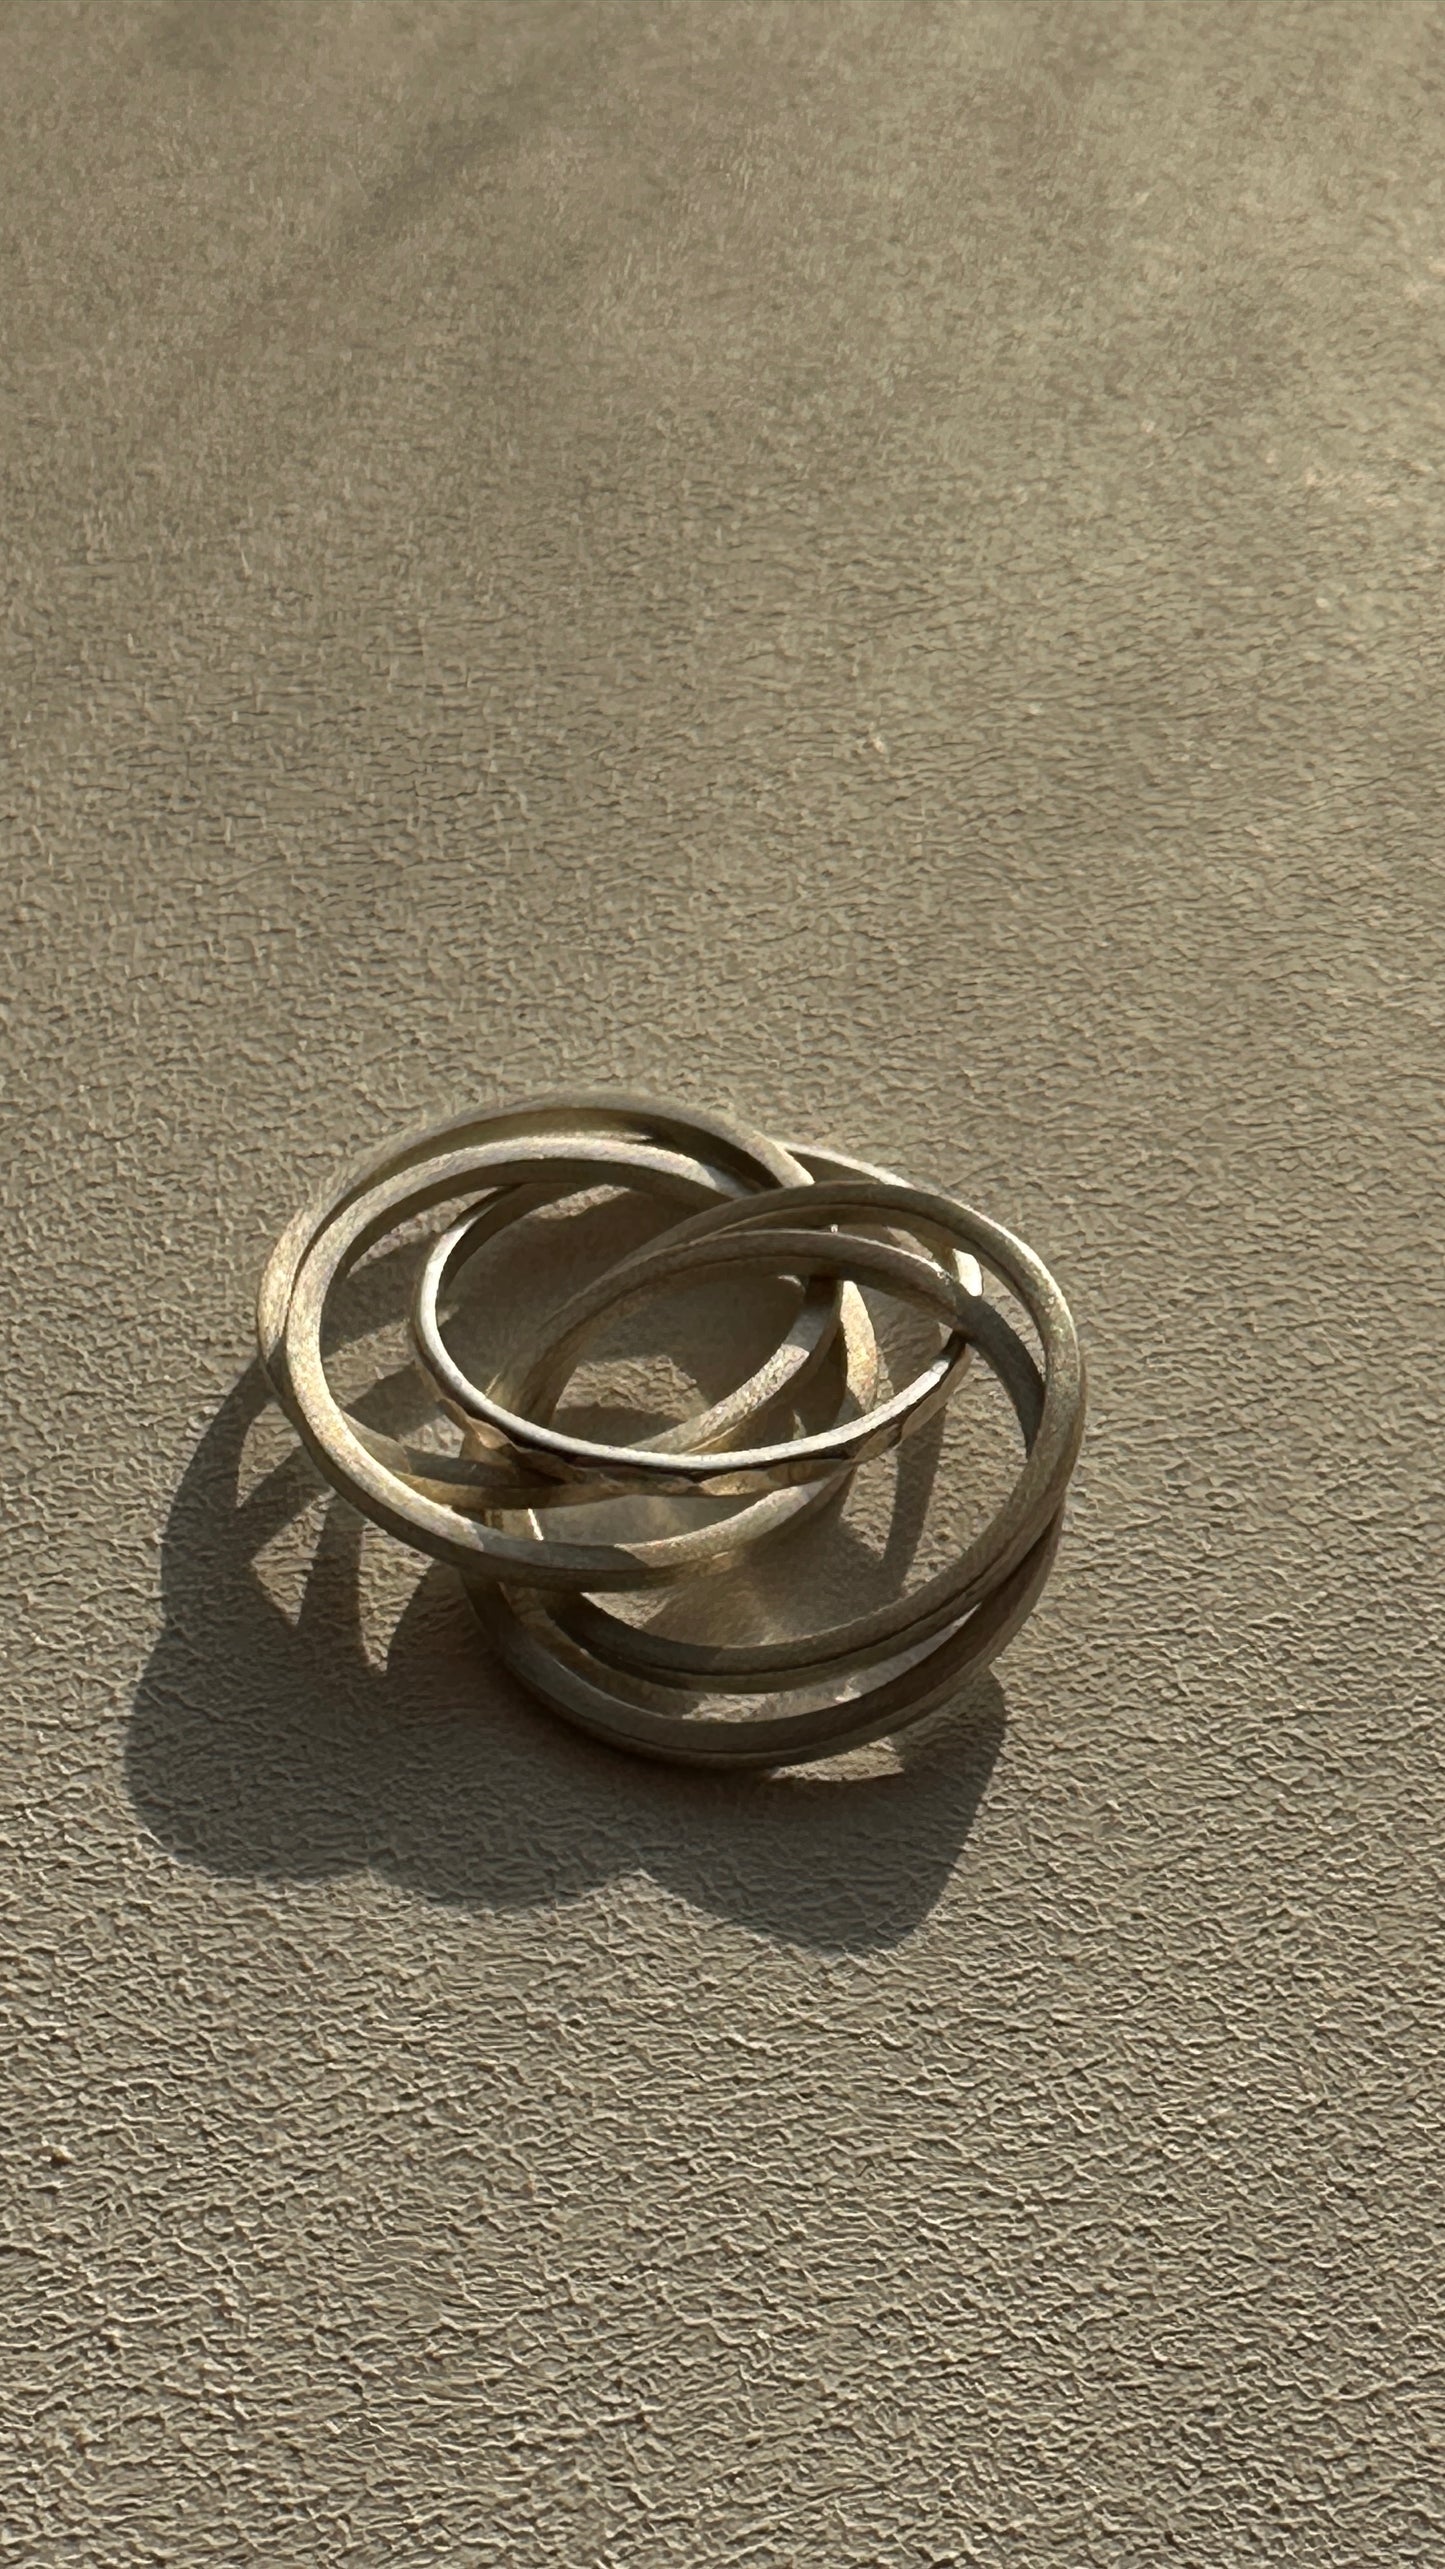 Ring "5 ELEMENTS"